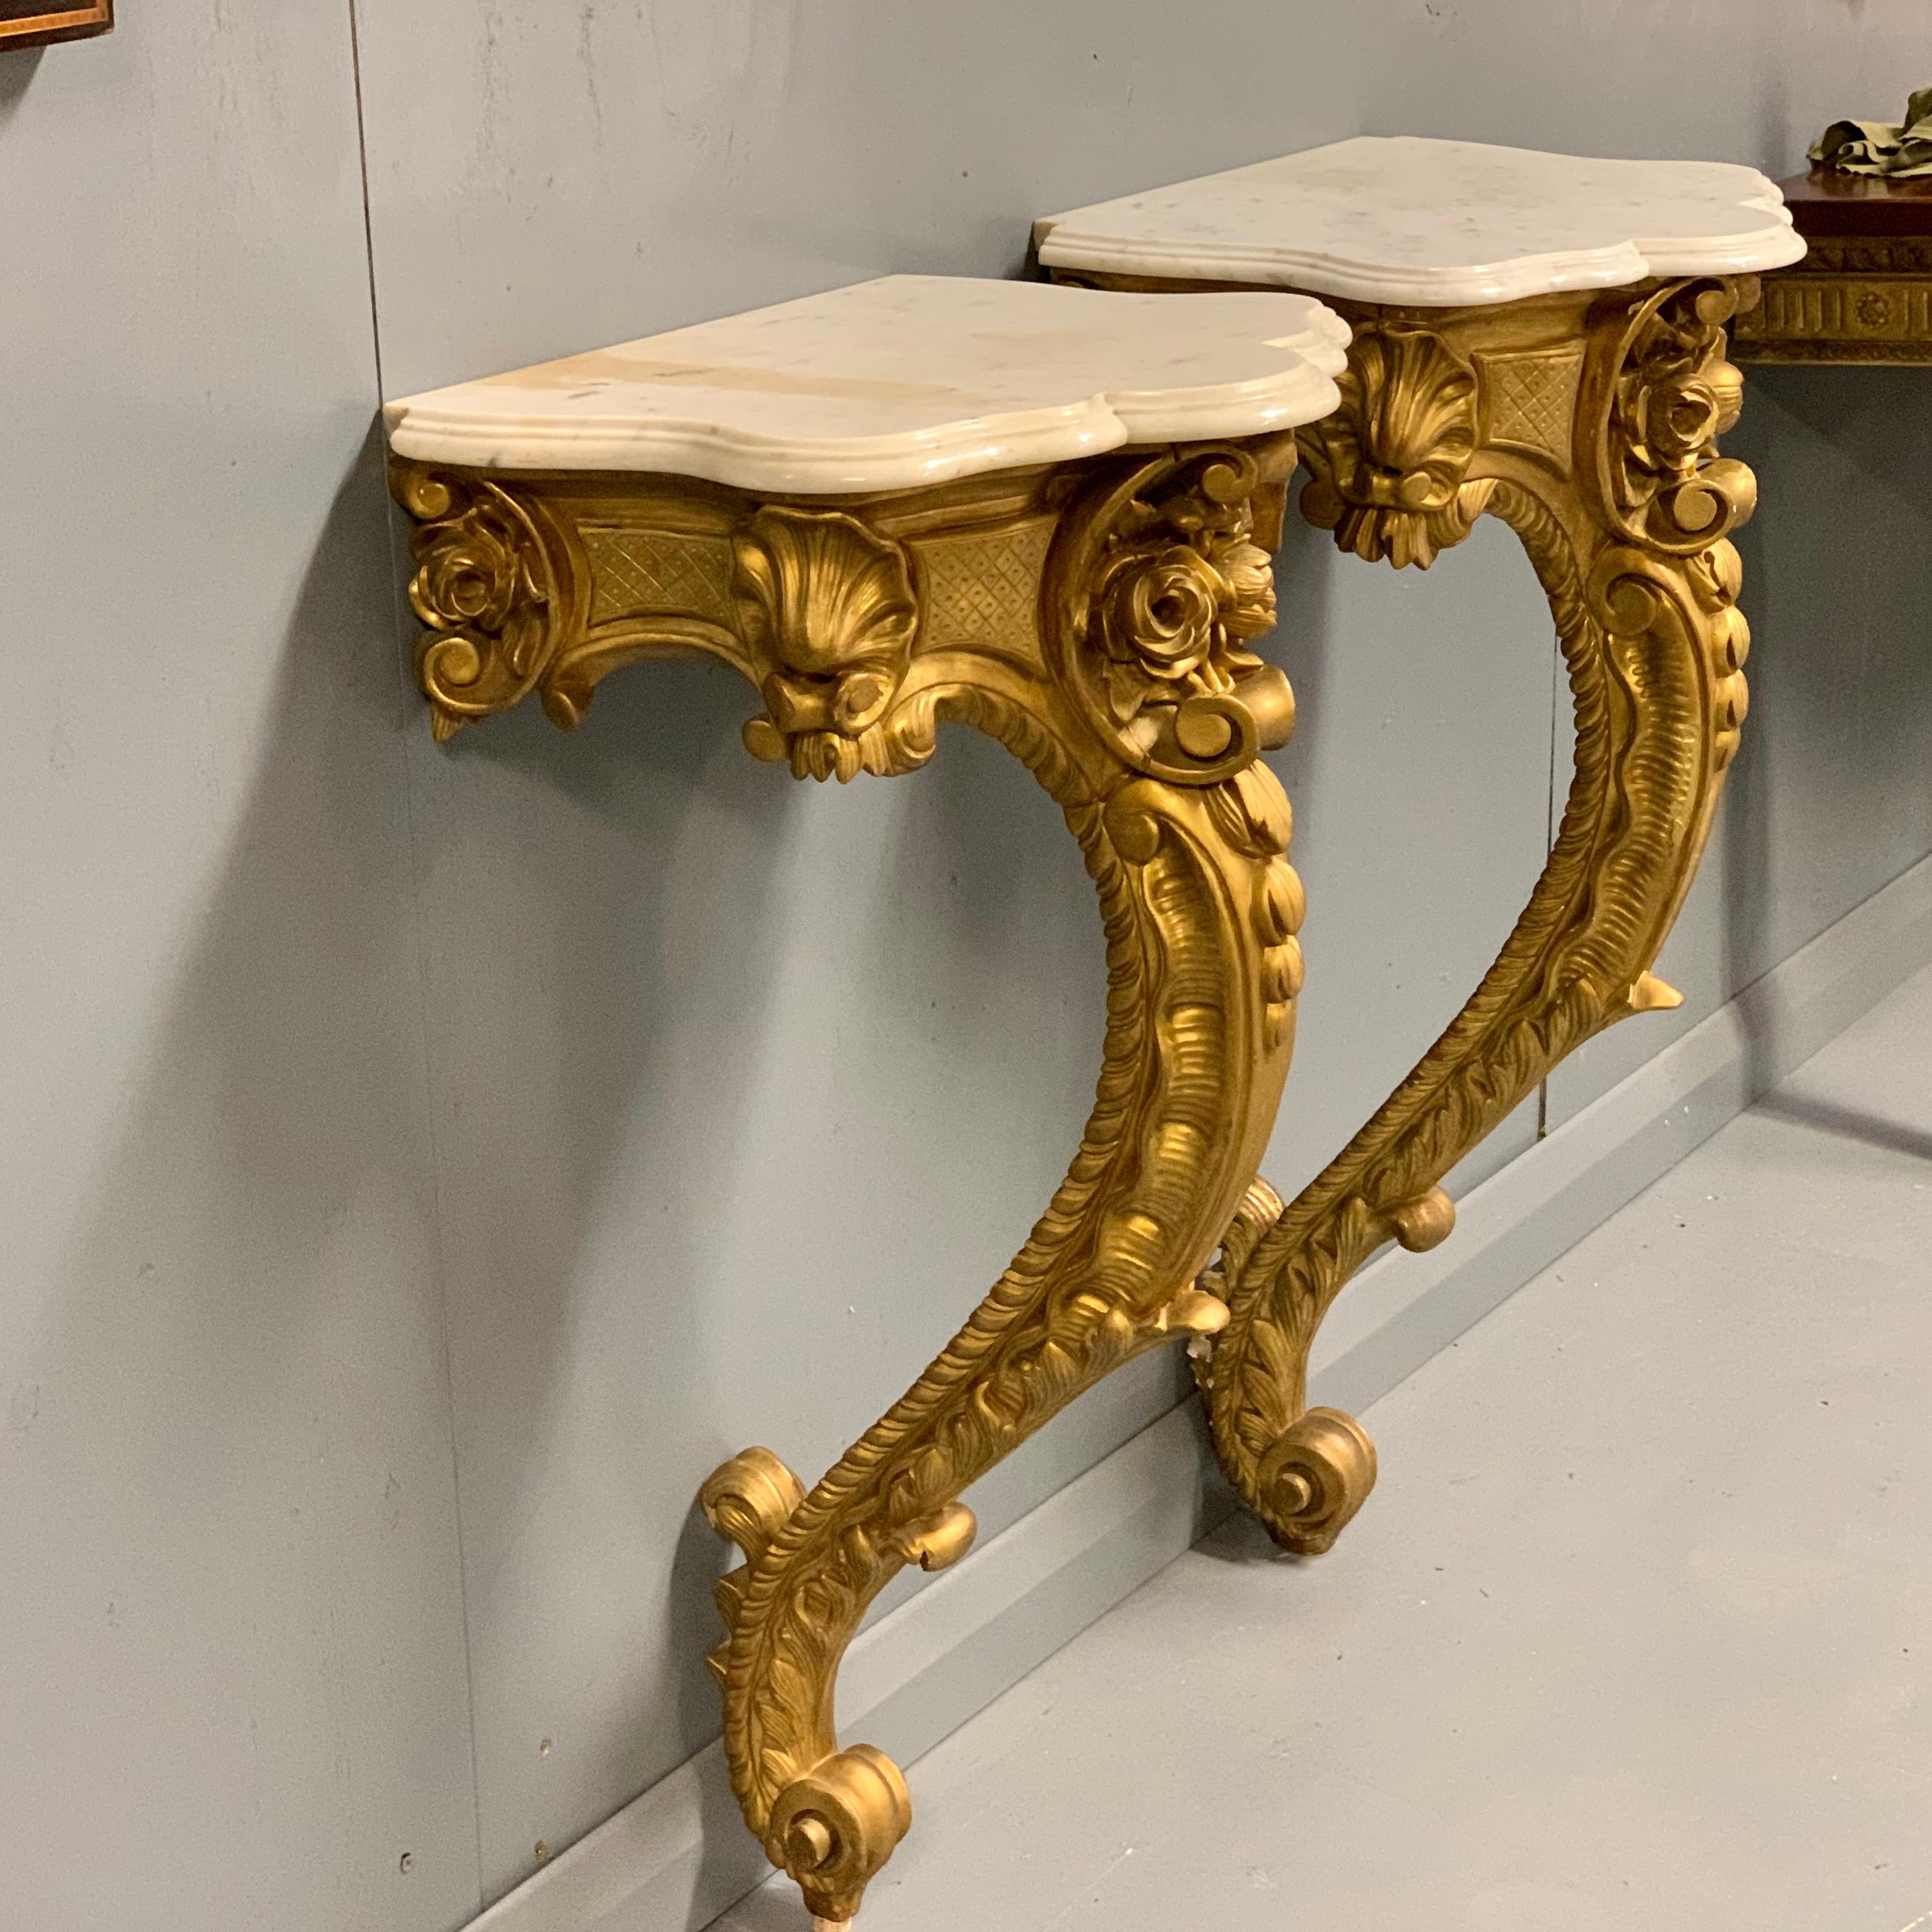 Beautiful pair of mid-19th century French gilt wall mounted console or pier tables with original Carrara marble tops.
Super quality and very elegant pair of console tables, often at this size they would be used between windows, thus known as 